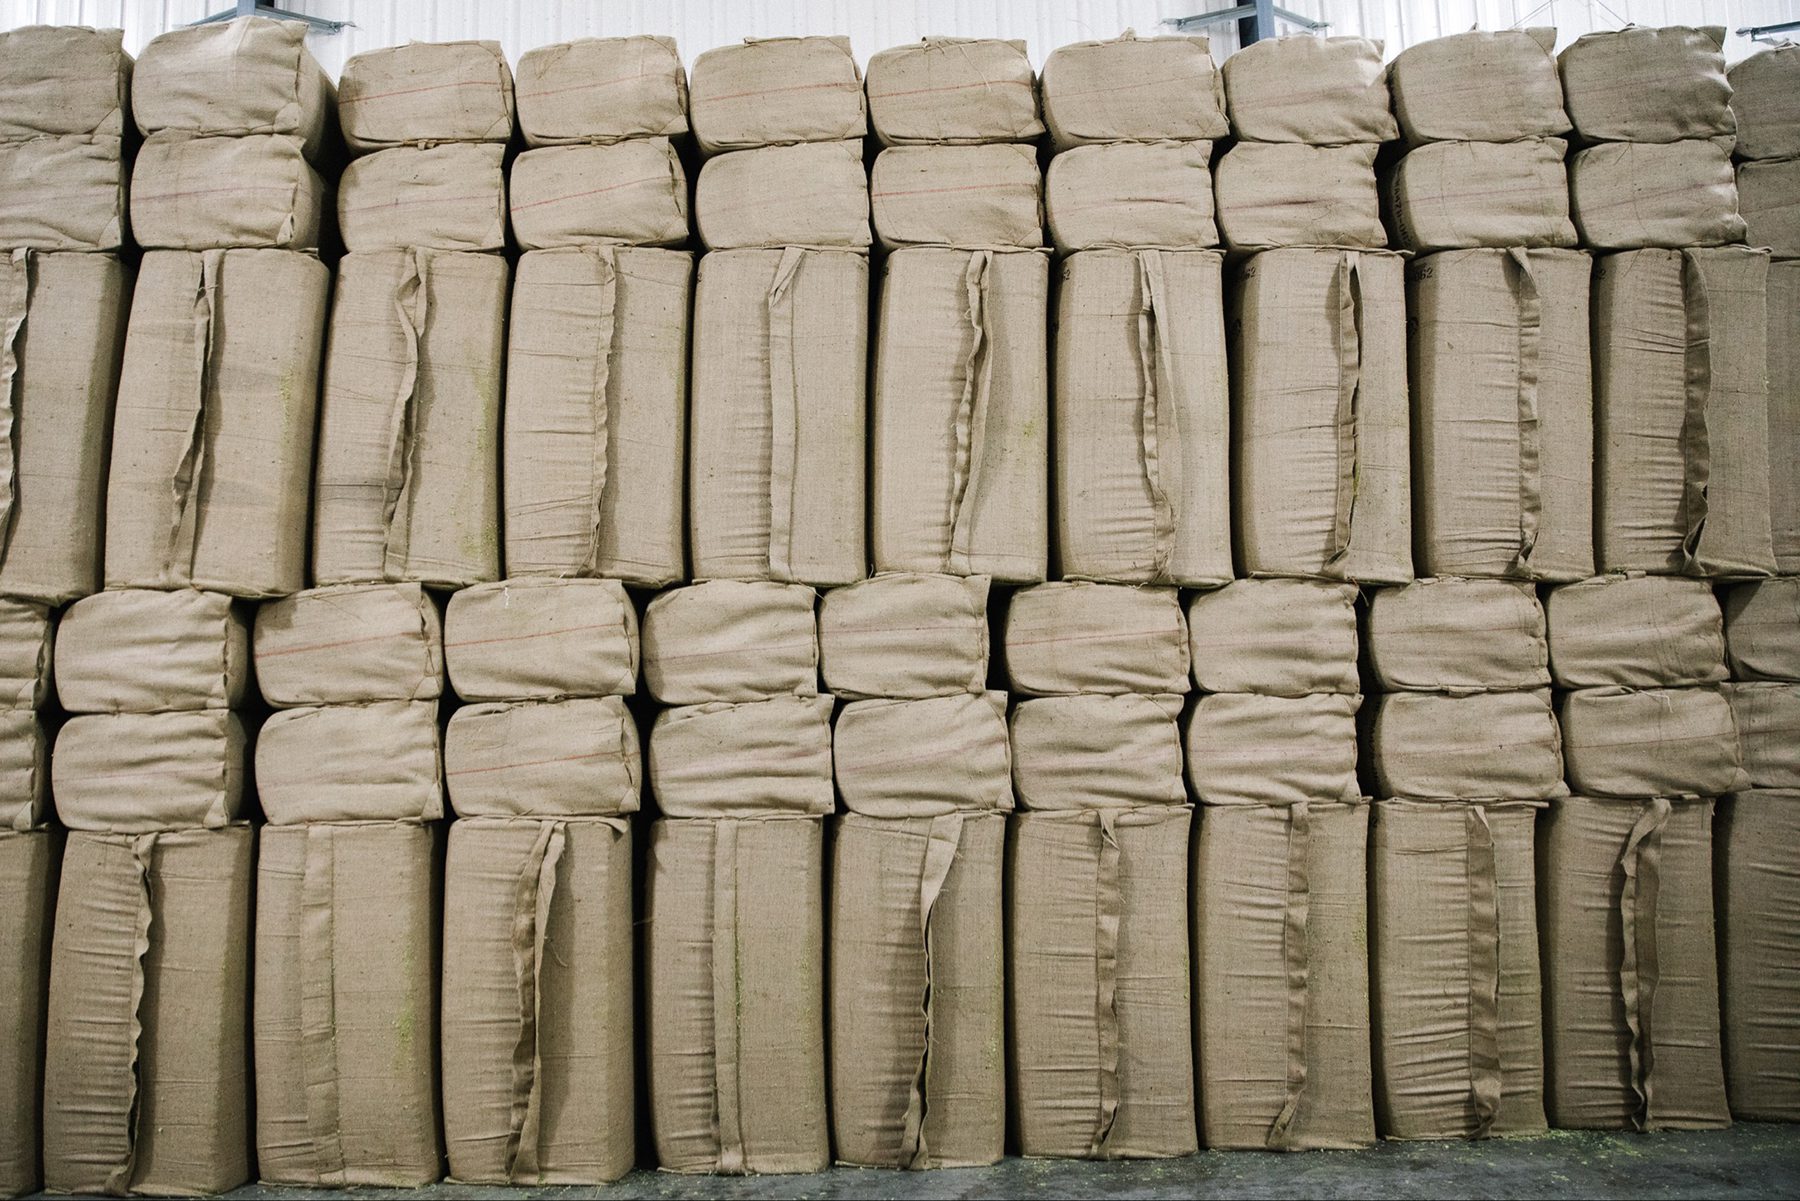 A stack of hop bales, each weighing 200 pounds